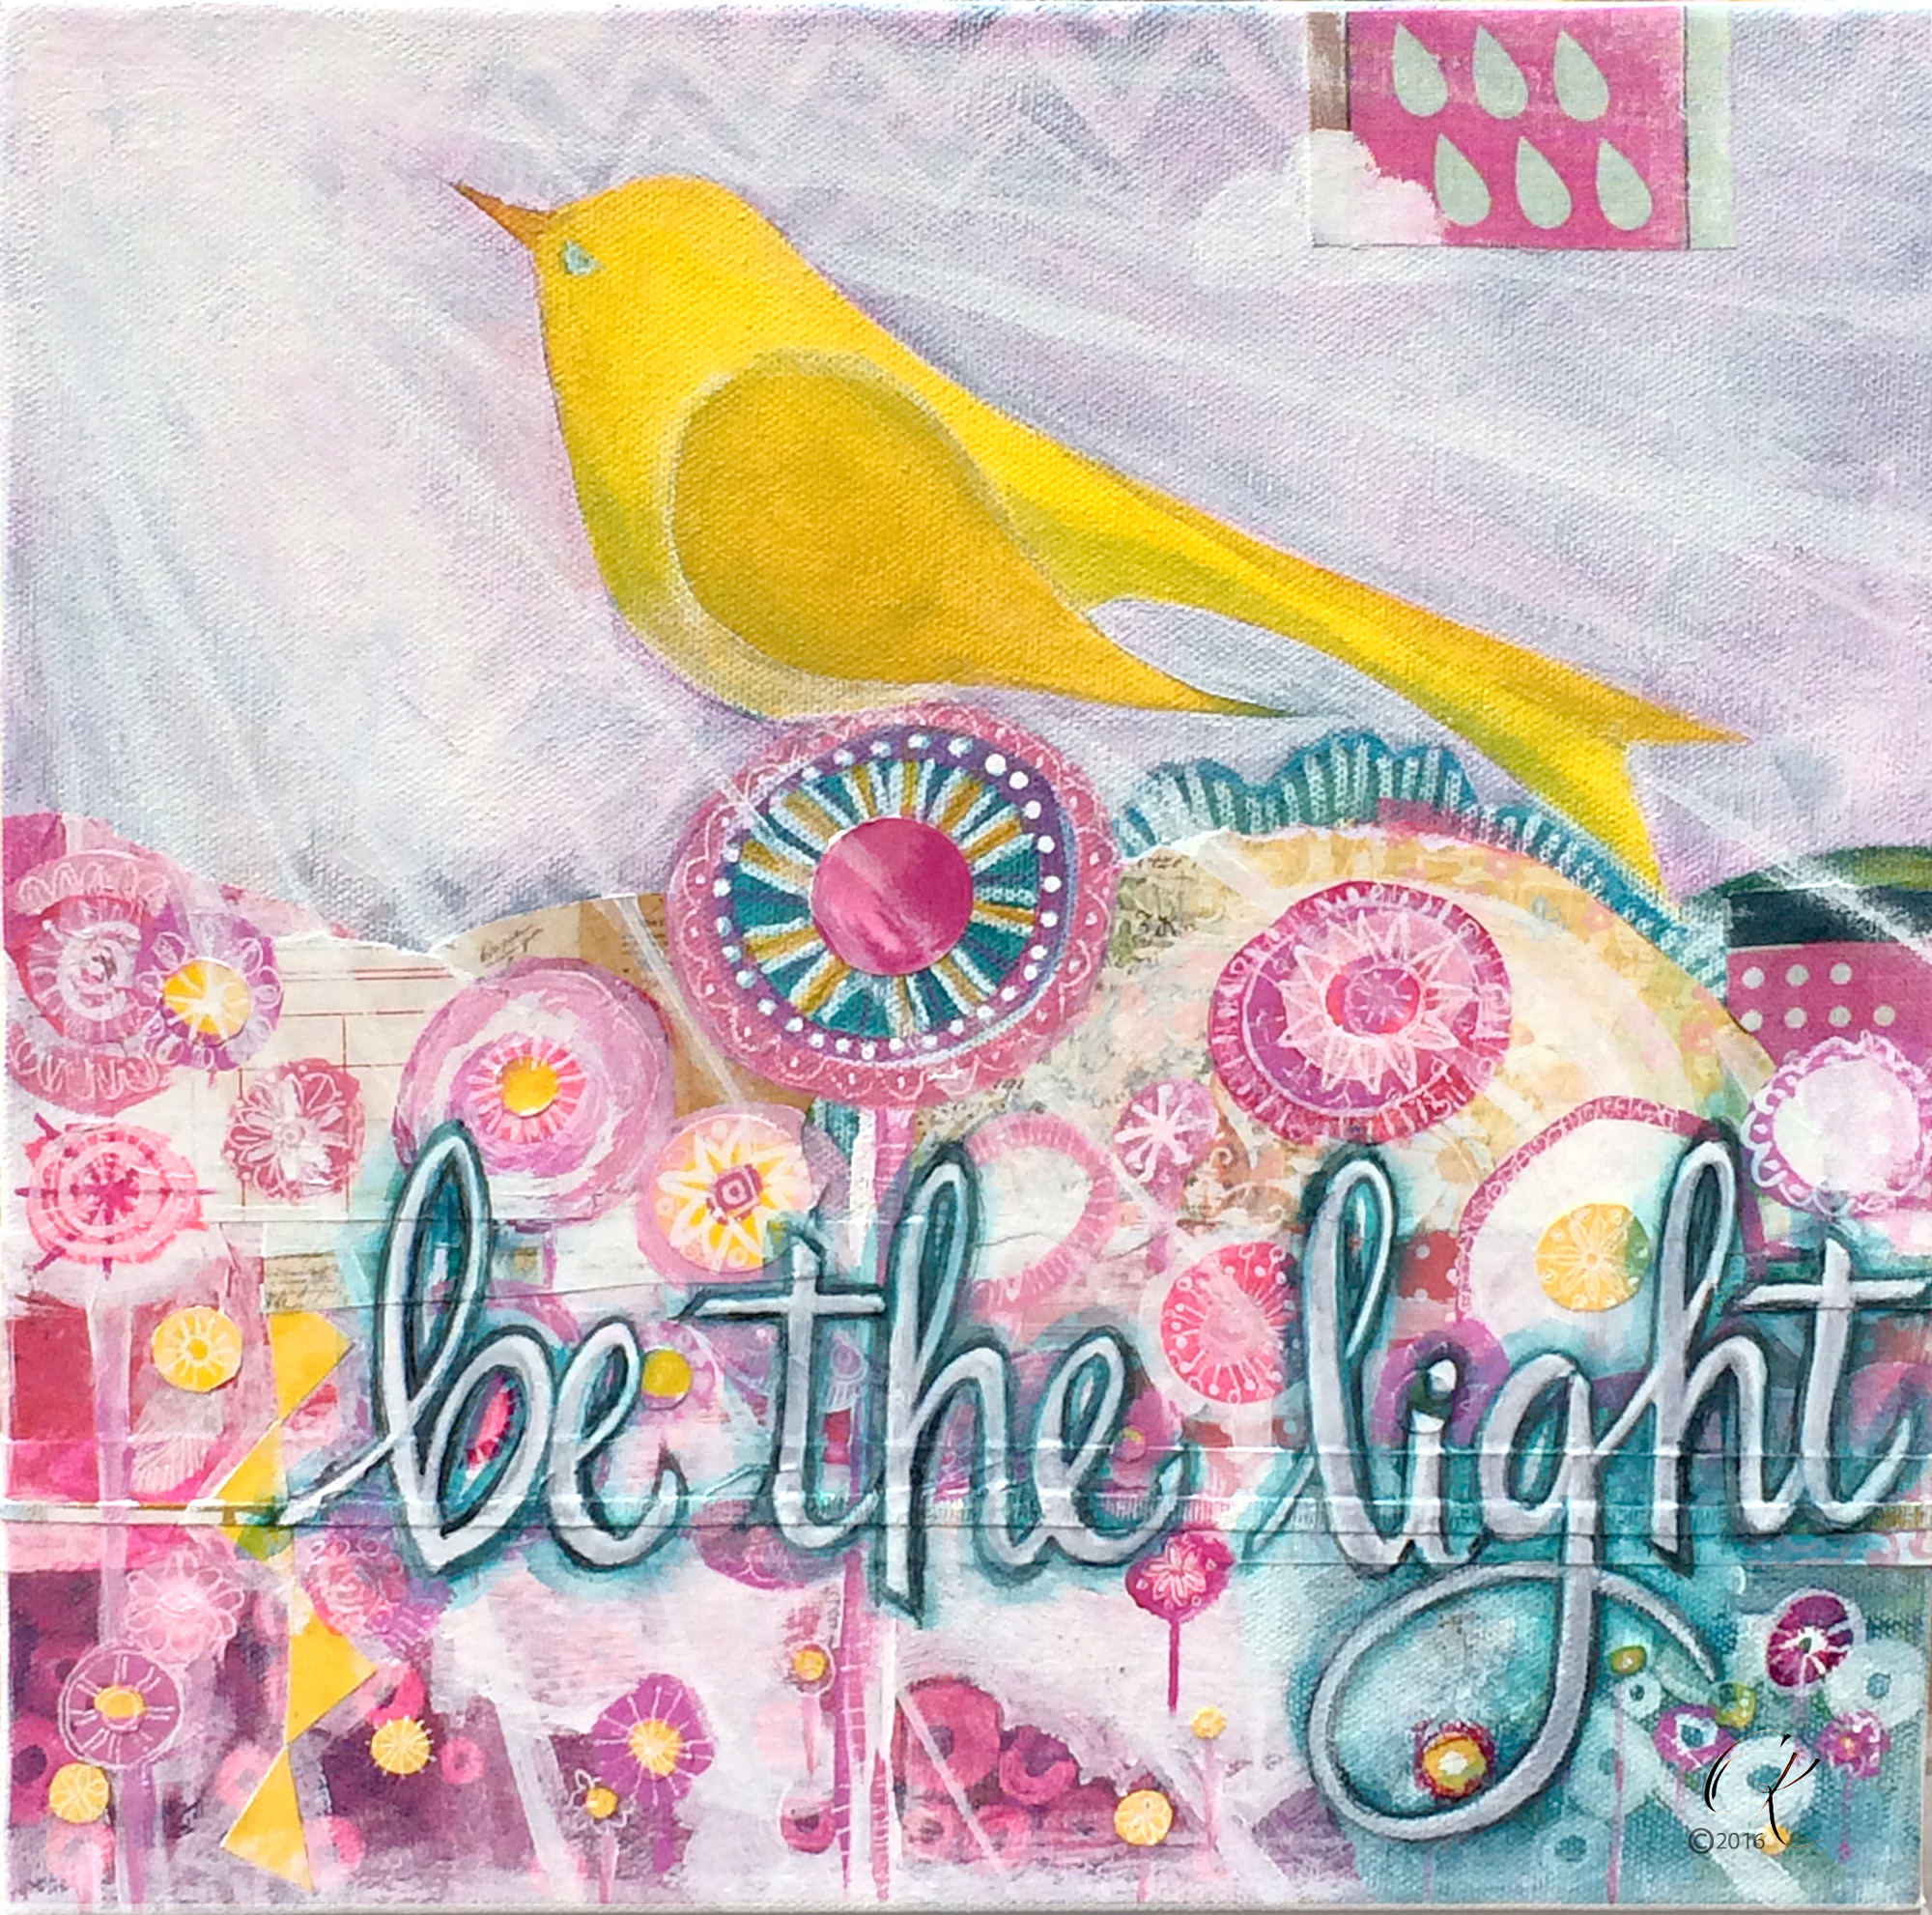 be-the-light